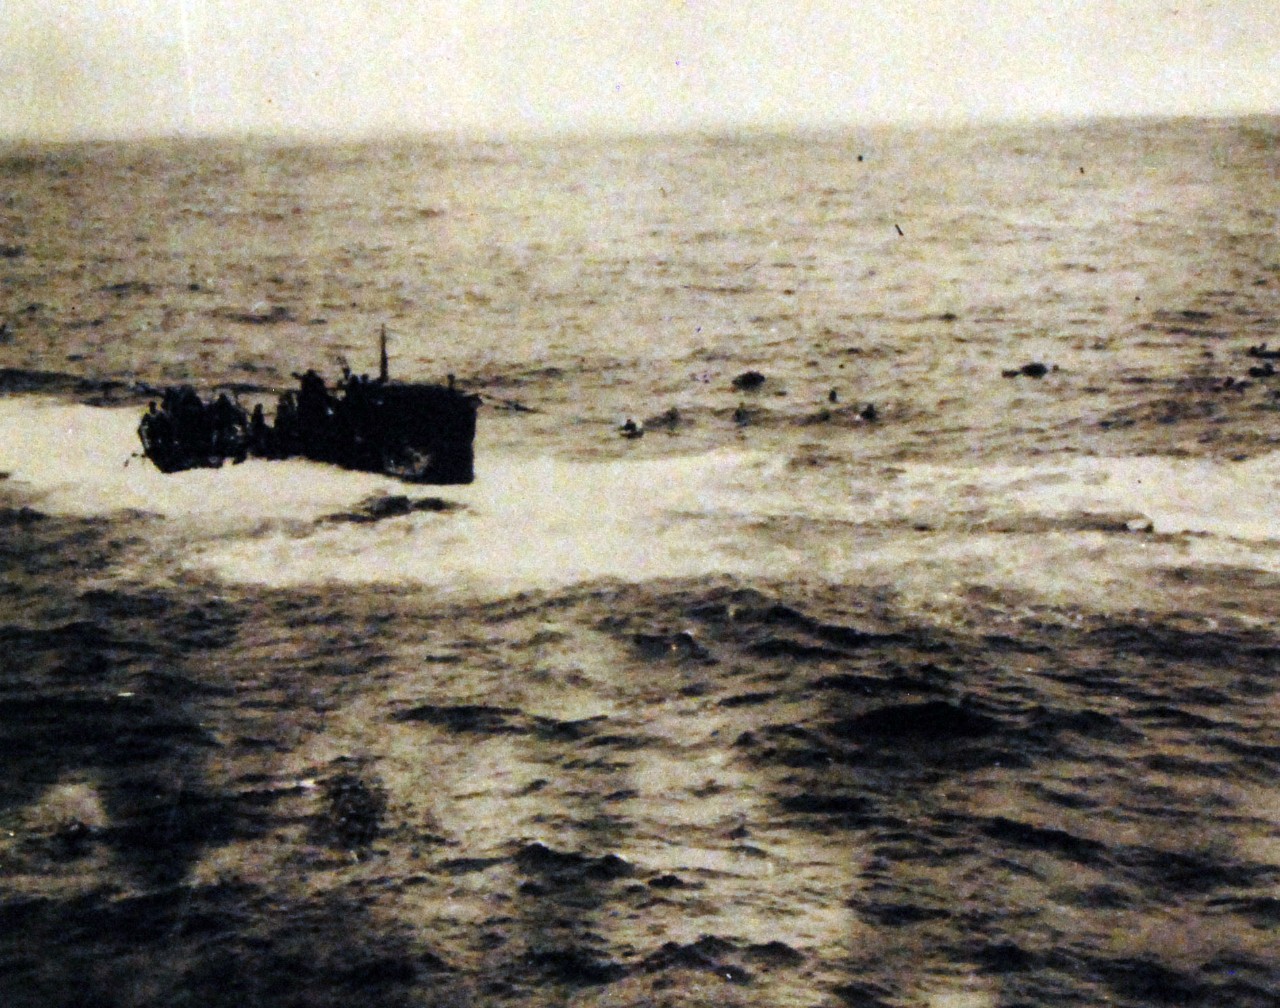 <p>80-G-49786: Rammed depth charged and shelled by USS Gandy (DE 764), USS Joyce (DE 317), and USS Peterson (DE 152), the German submarine U-550 was sunk in April 1944. The crew is shown abandoning the ship. Released April 1944.&nbsp;</p>
